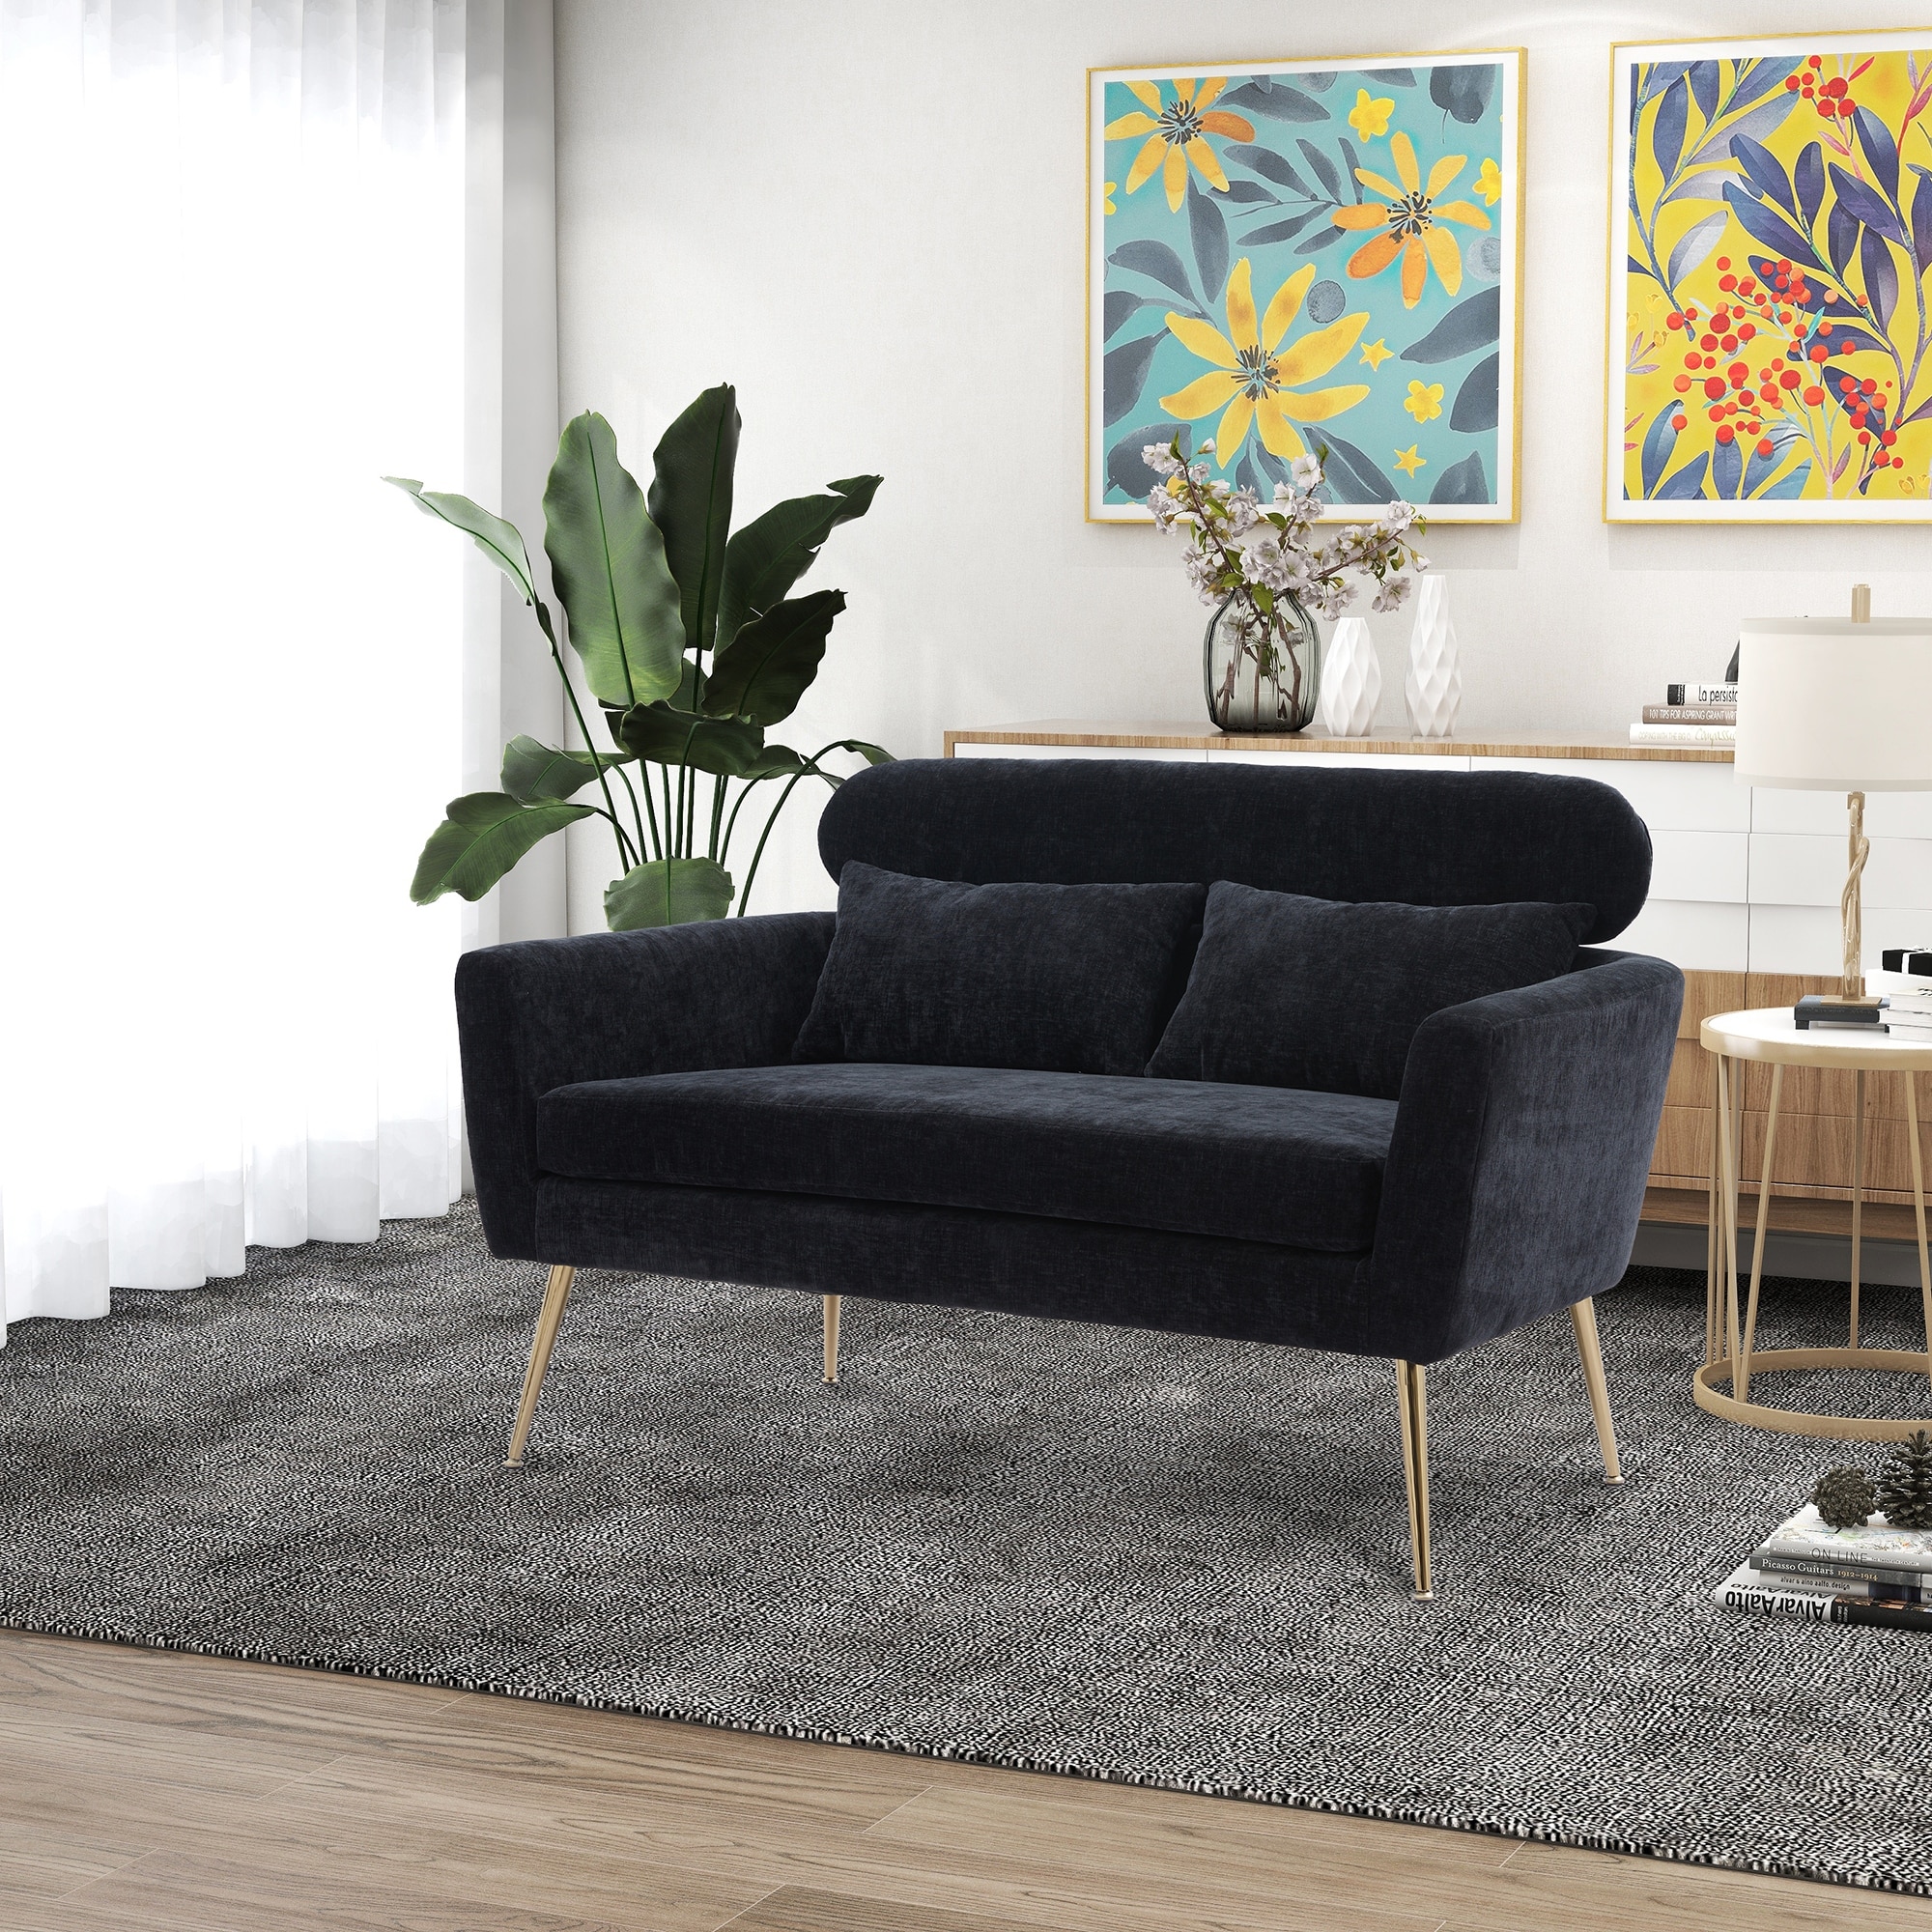 https://ak1.ostkcdn.com/images/products/is/images/direct/9d4b65c3650d76debf3a2d15c9b354d41ab4476f/52%27%27Loveseat-Sofa-Two-Seat-Mid-Century-Modern-Sofa-with-2-Throw-Pillows-and-Gold-Metal-Legs-for-Small-Space-Apartments-Bedroom.jpg